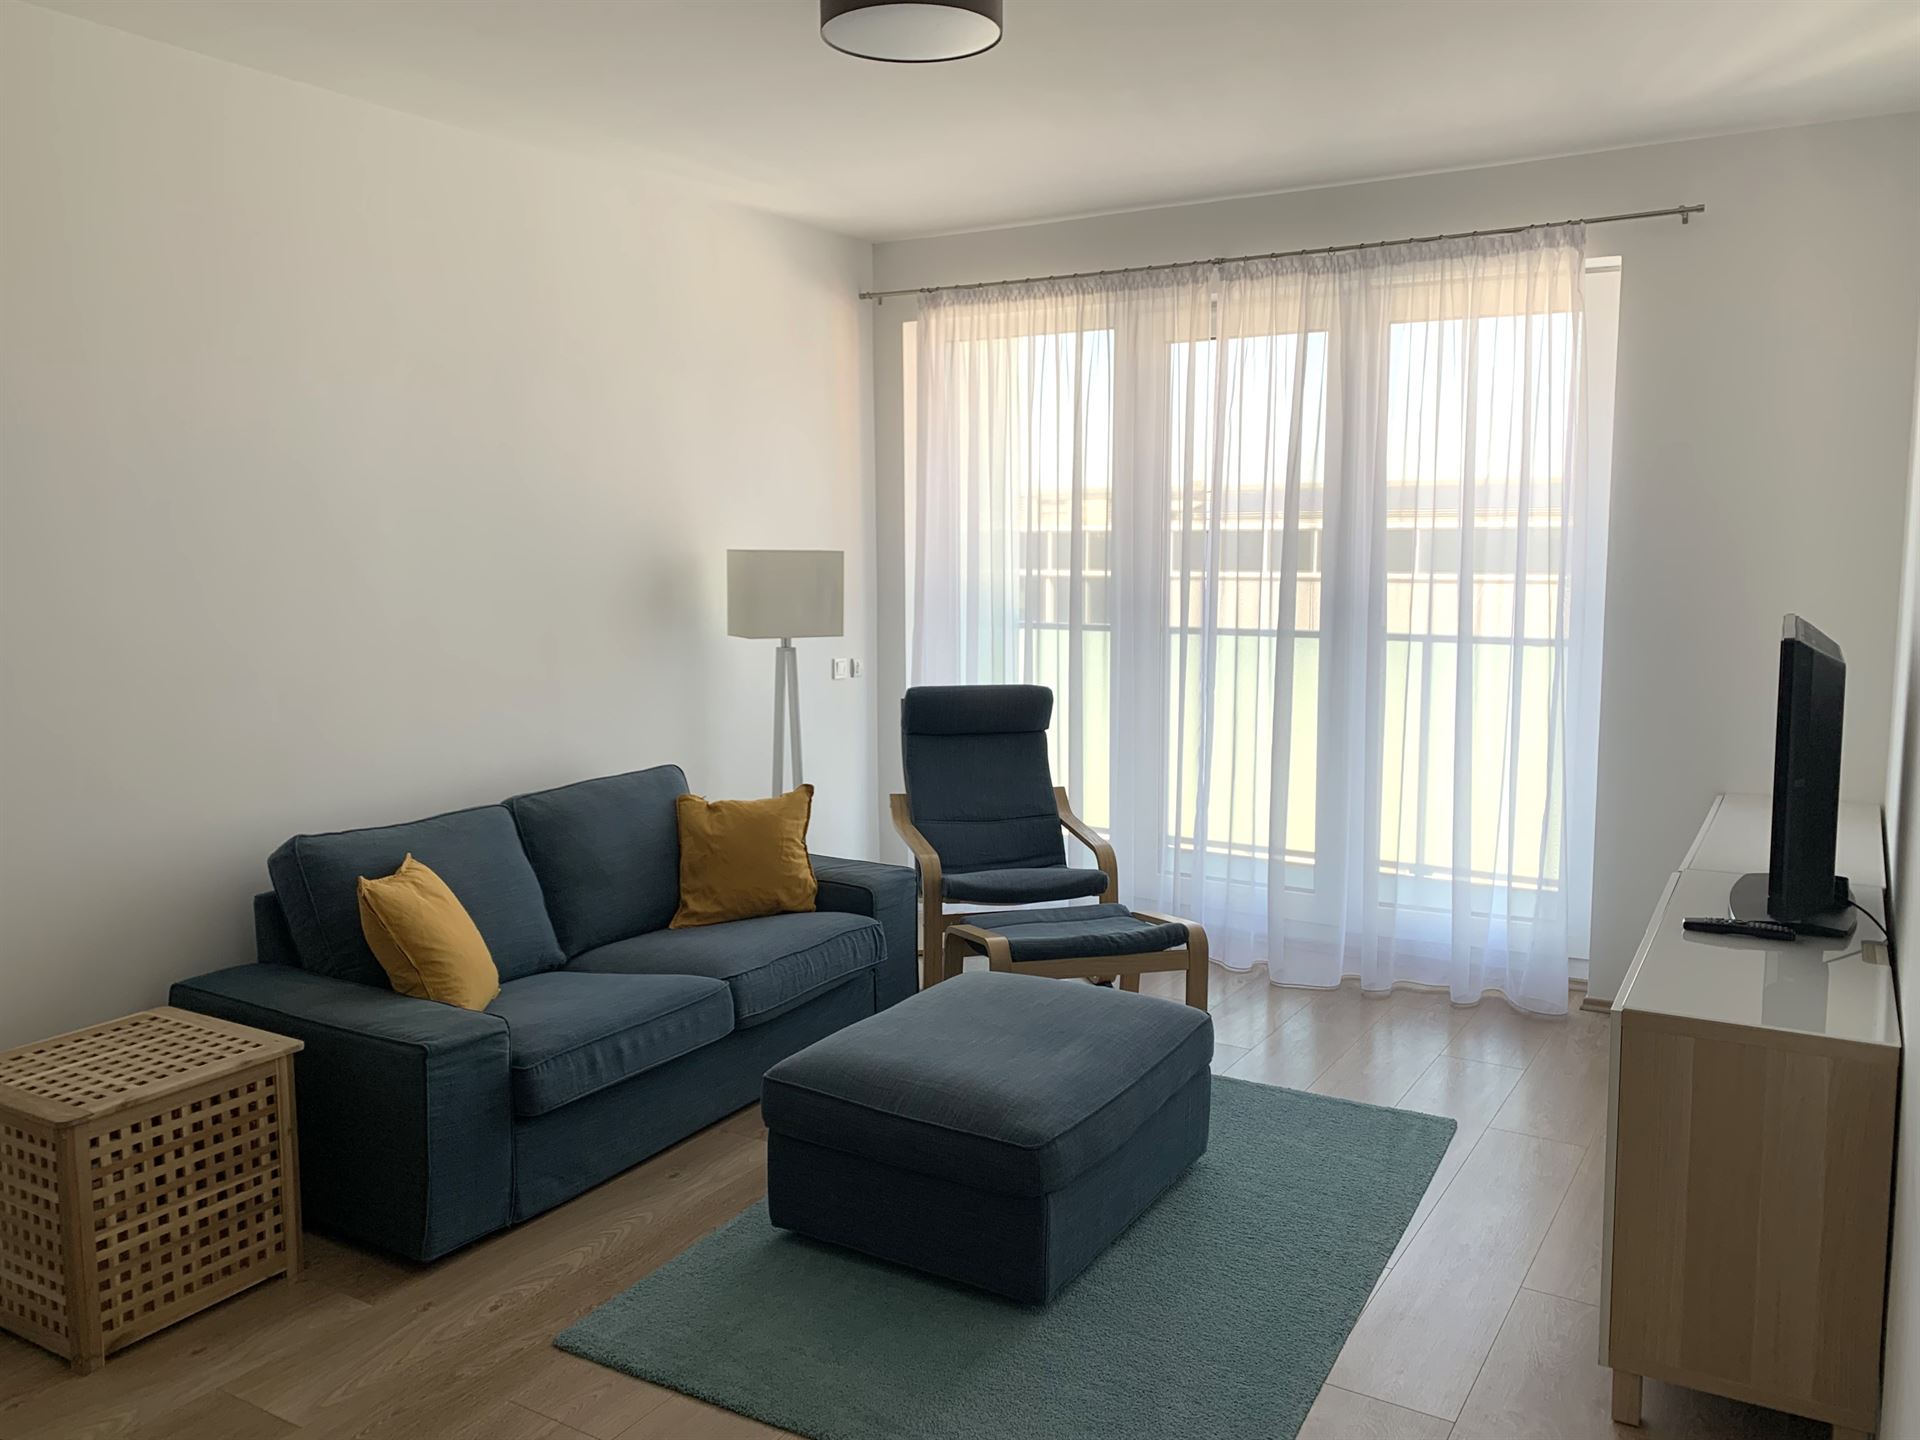 budapest-rental-long-term-property-for-rent-district-13-flat-for-rent-new-condo-rental3